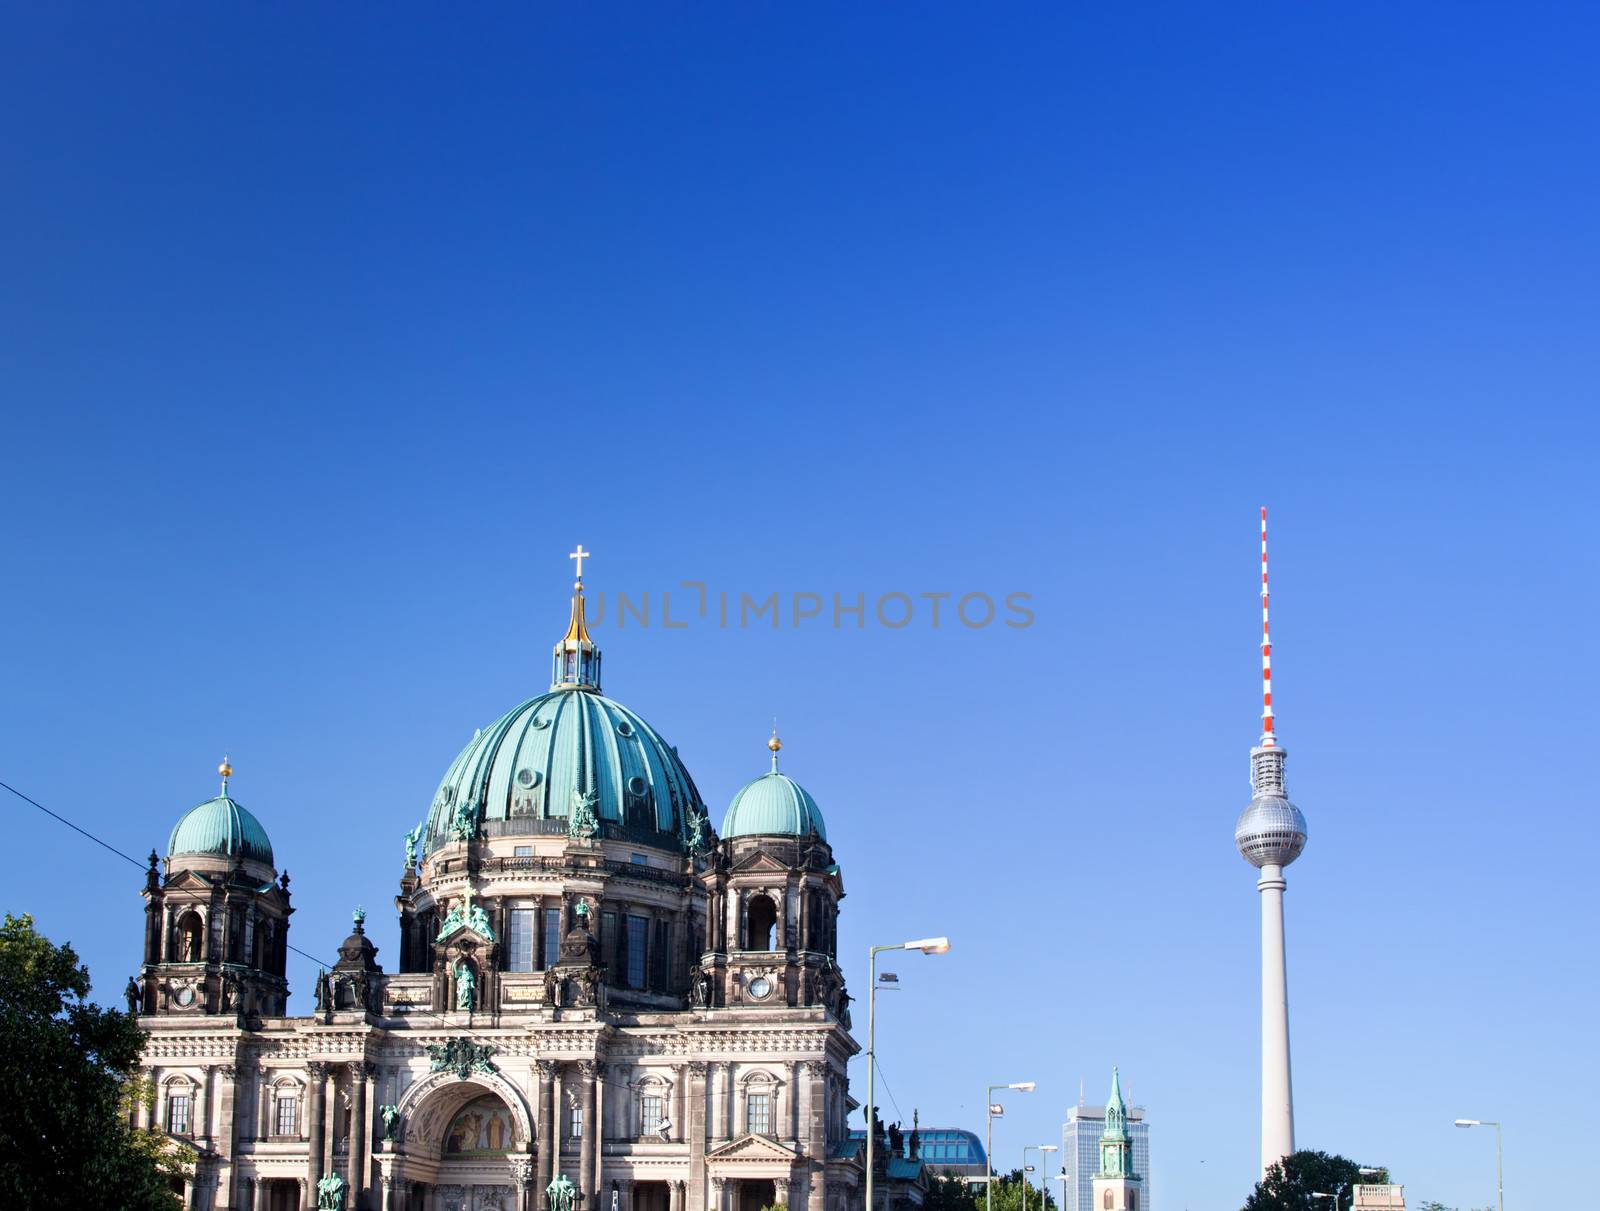 Berlin Cathedral and TV Tower, Berlin, Germany. Sunny blue sky